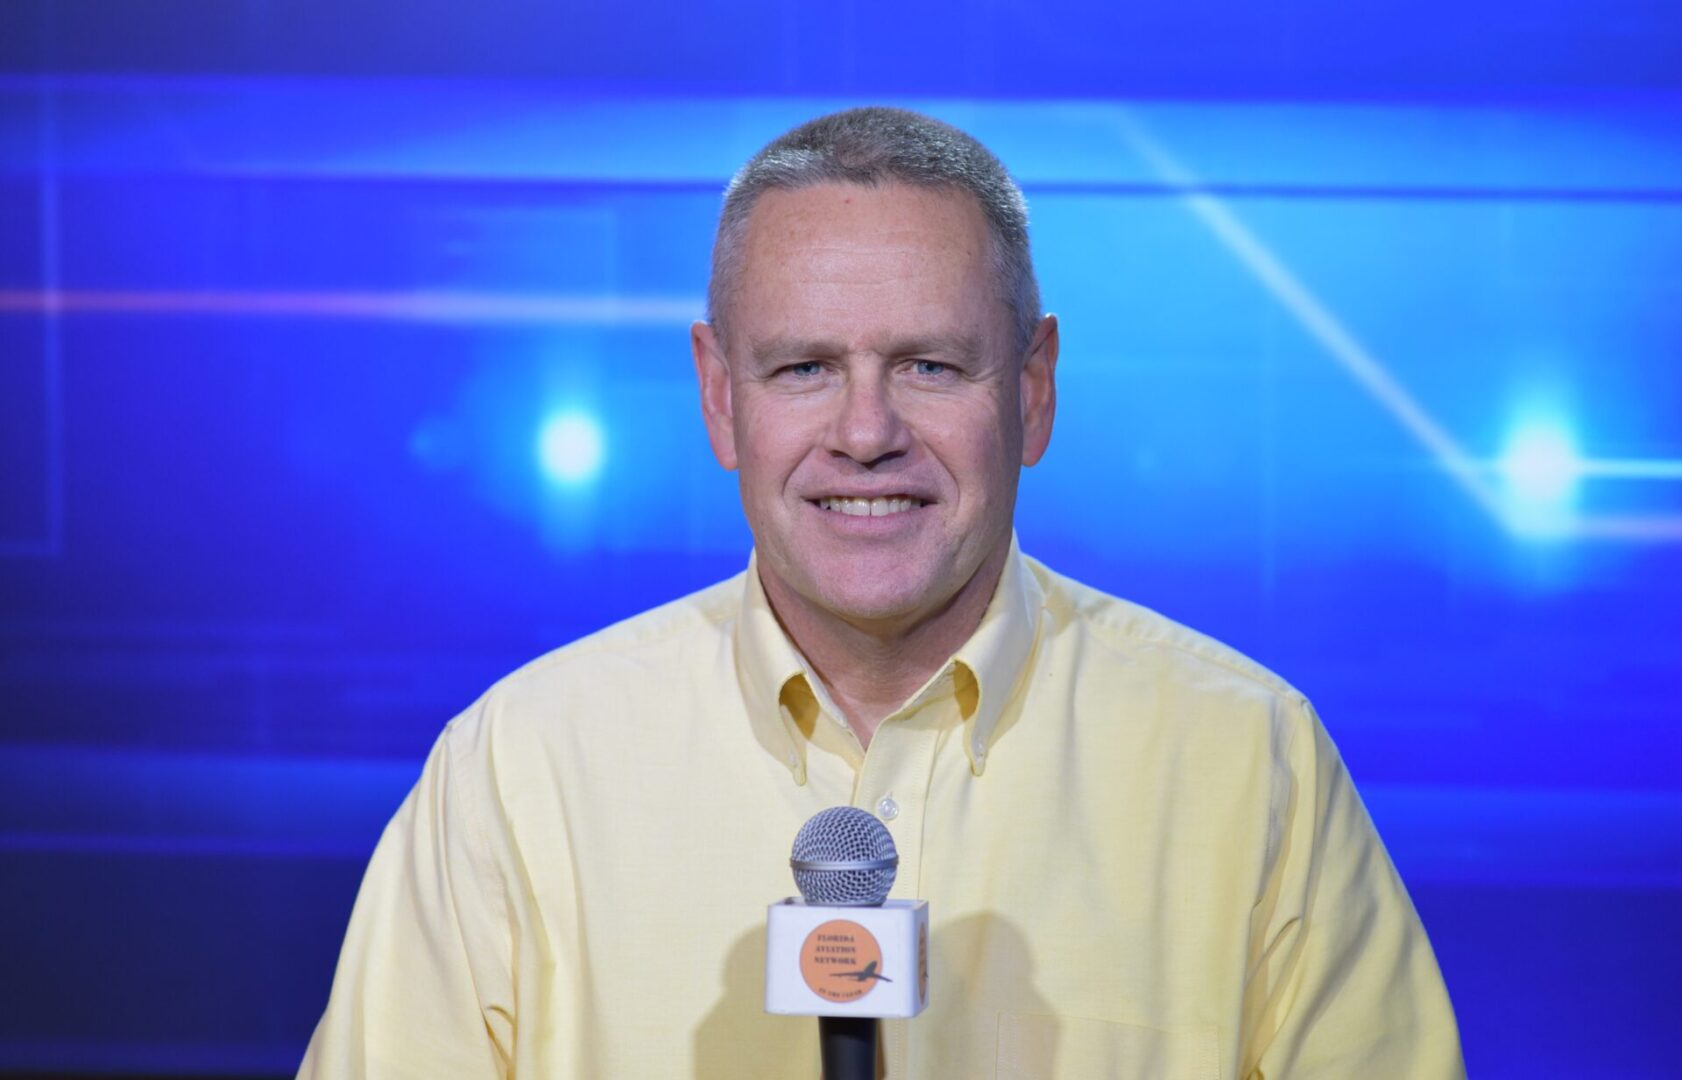 A man in yellow shirt holding a microphone.